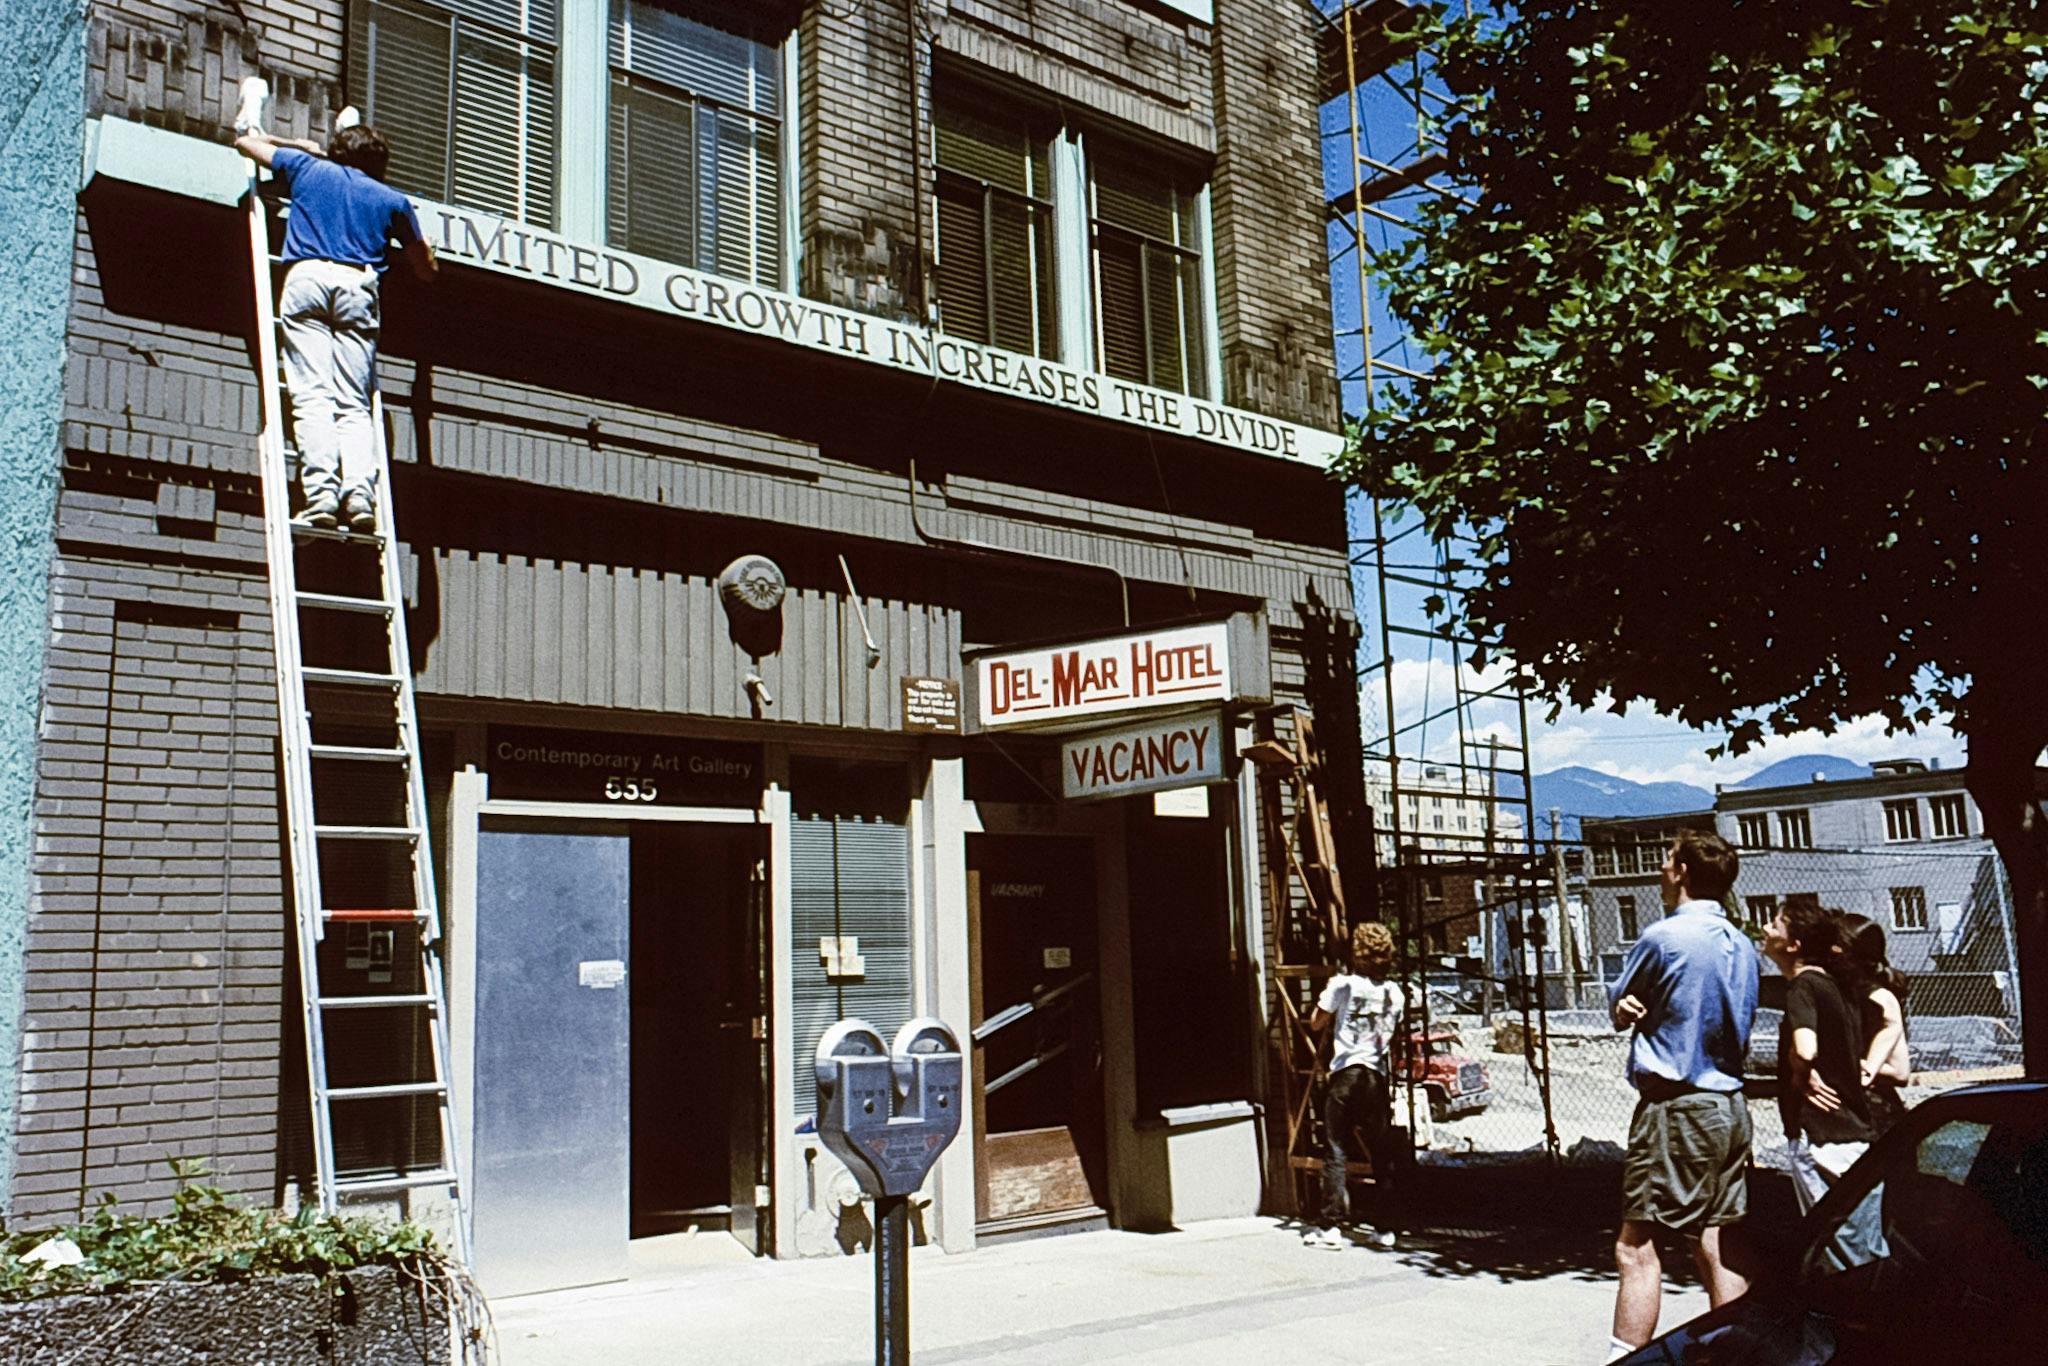 On the front of a building, 2 people working on ladders install metal letters. They read: "Unlimited Growth Increases The Divide." While the two people work, three others stand outside, looking on. 